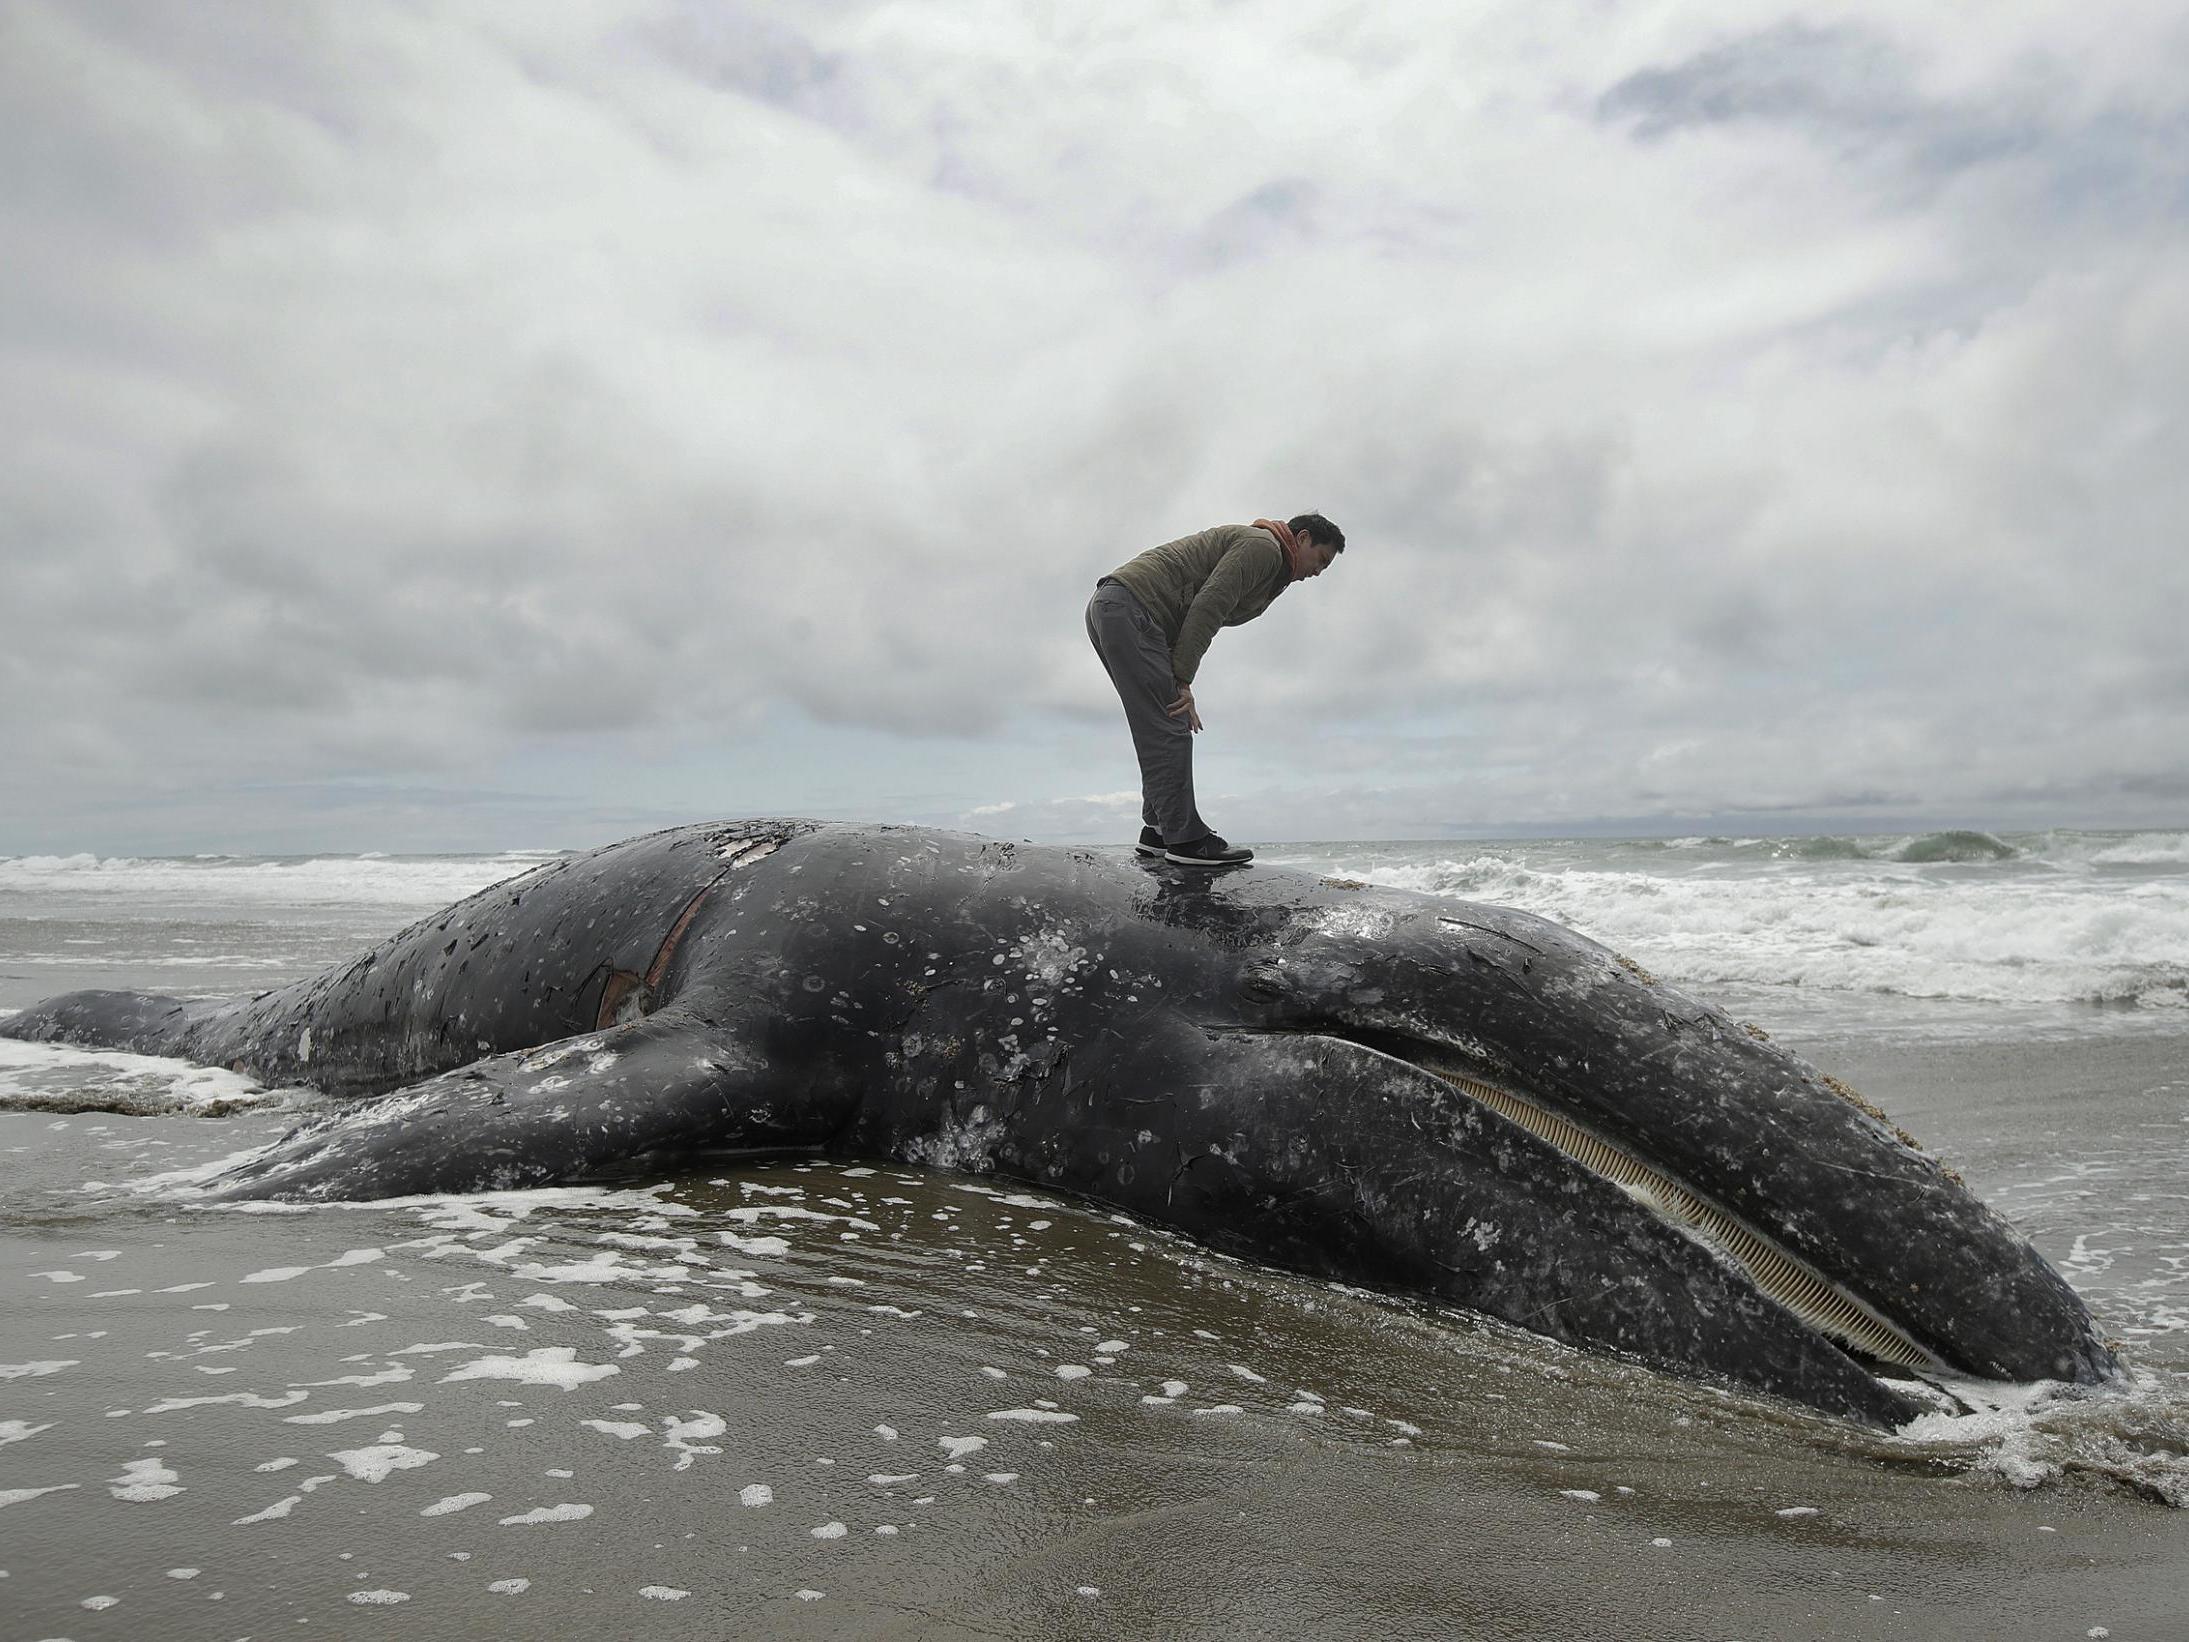 Federal scientists opened an investigation into what is causing a spike in grey whale deaths along the West Coast of the US in 2019. So far, about 70 whales have stranded on the coasts of Washington, Oregon, Alaska and California, the most since 2000.